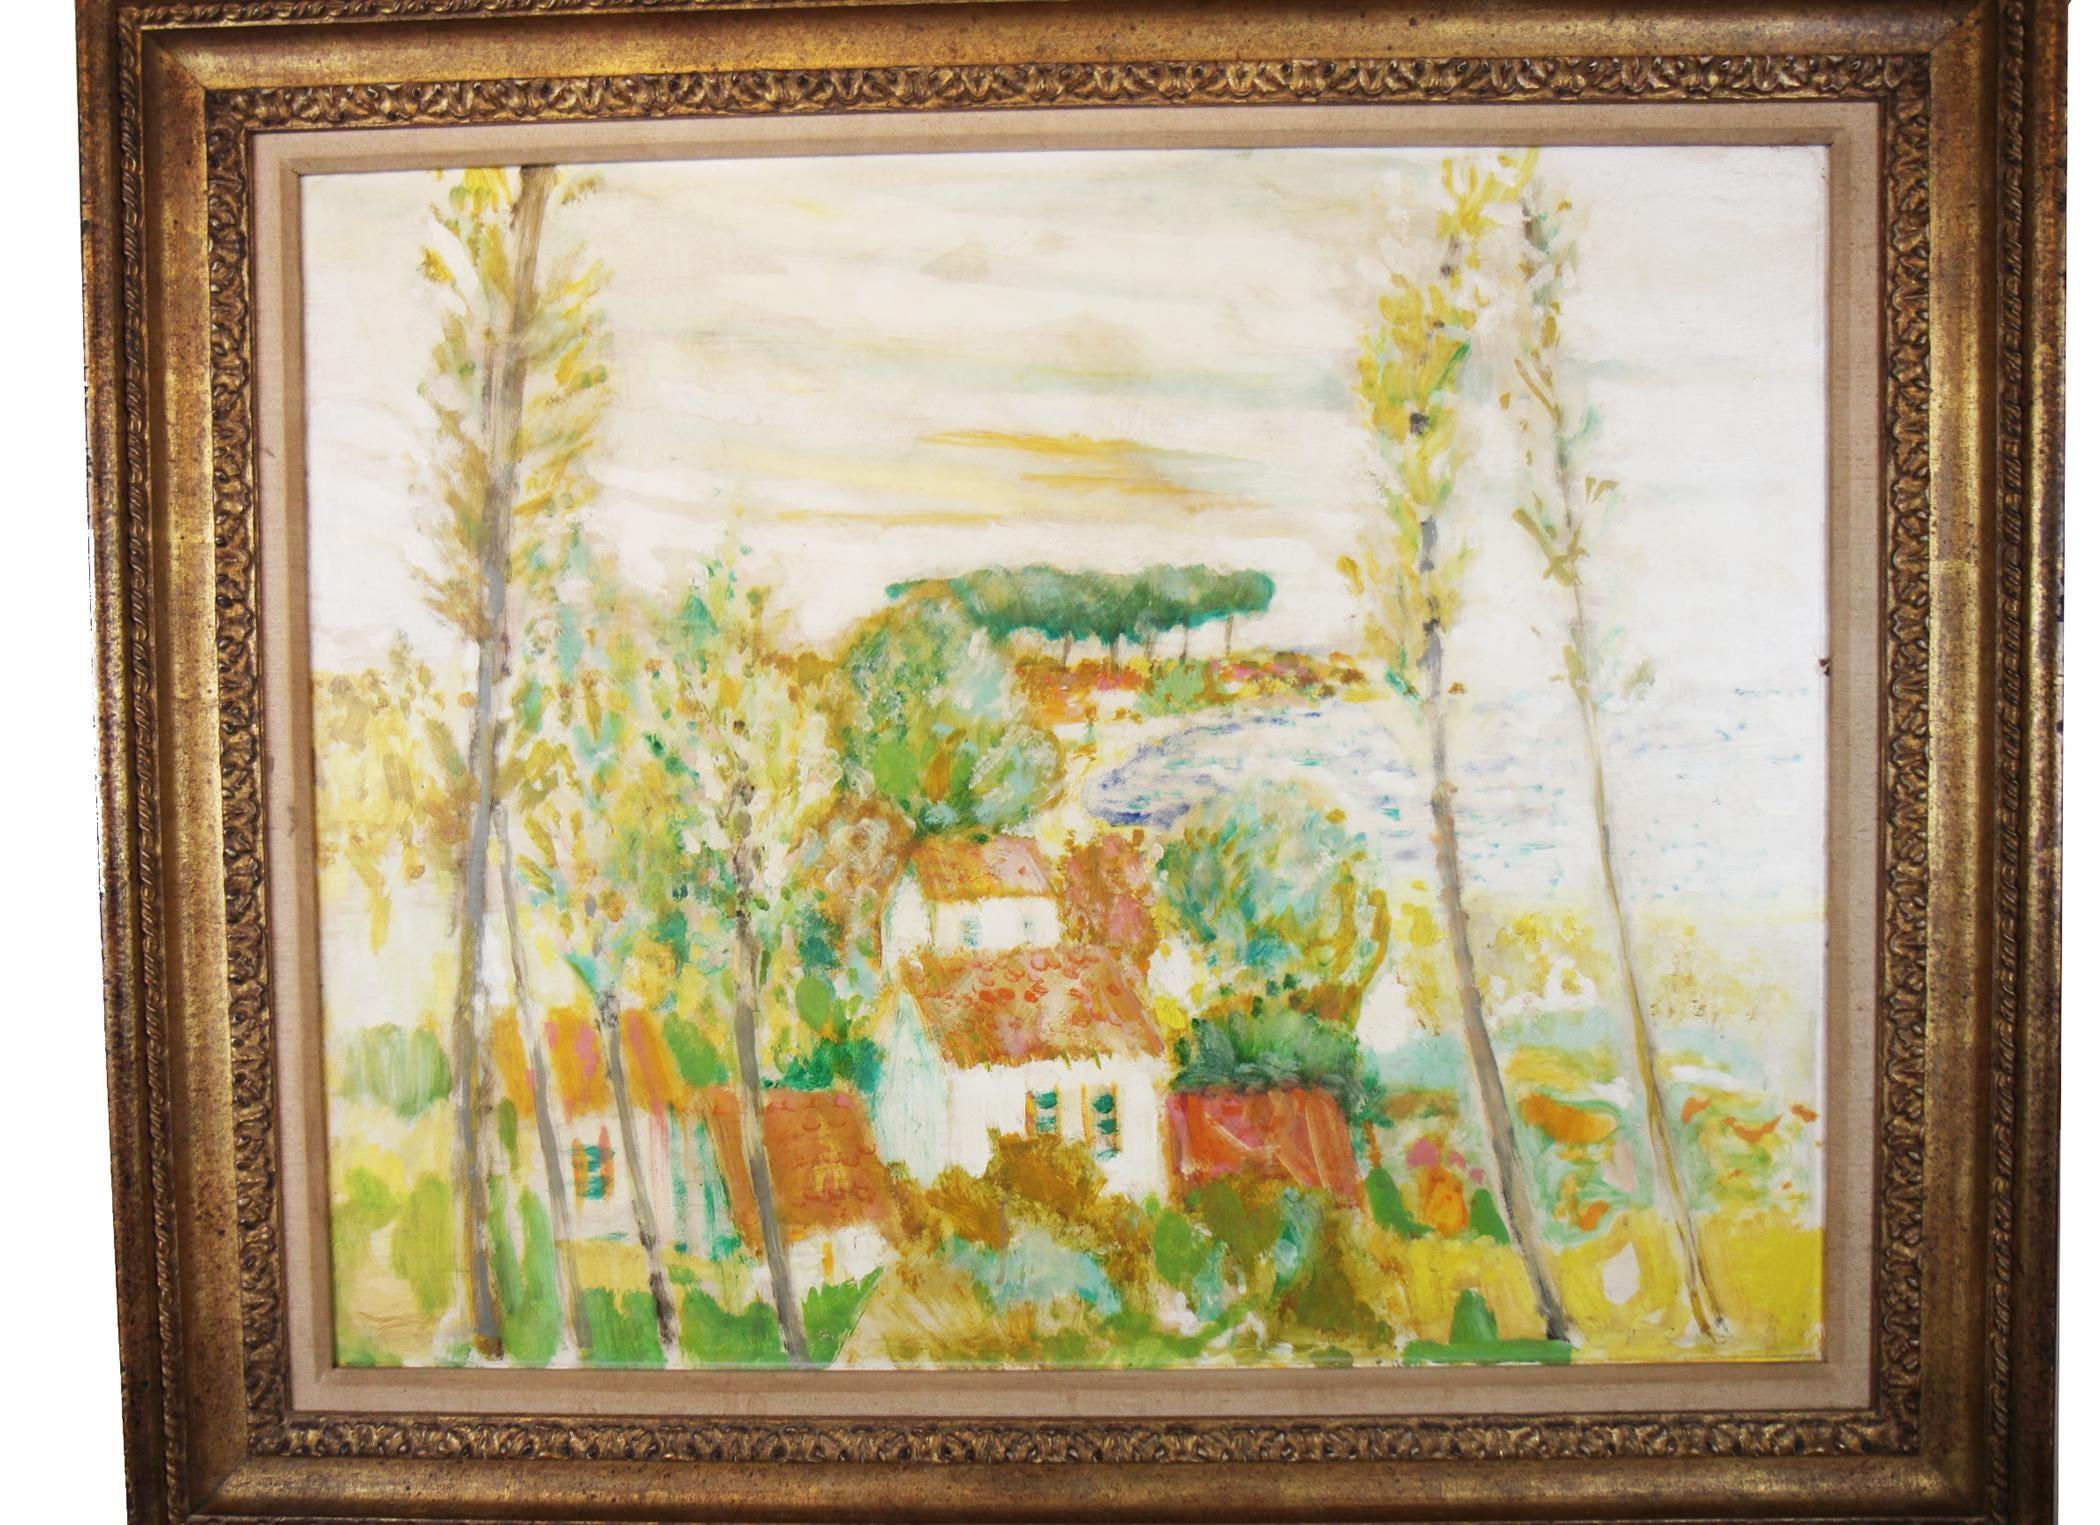 Gilmour signed impressionist landscape in greens, orange and yellows. Unframed dimensions: 31.5